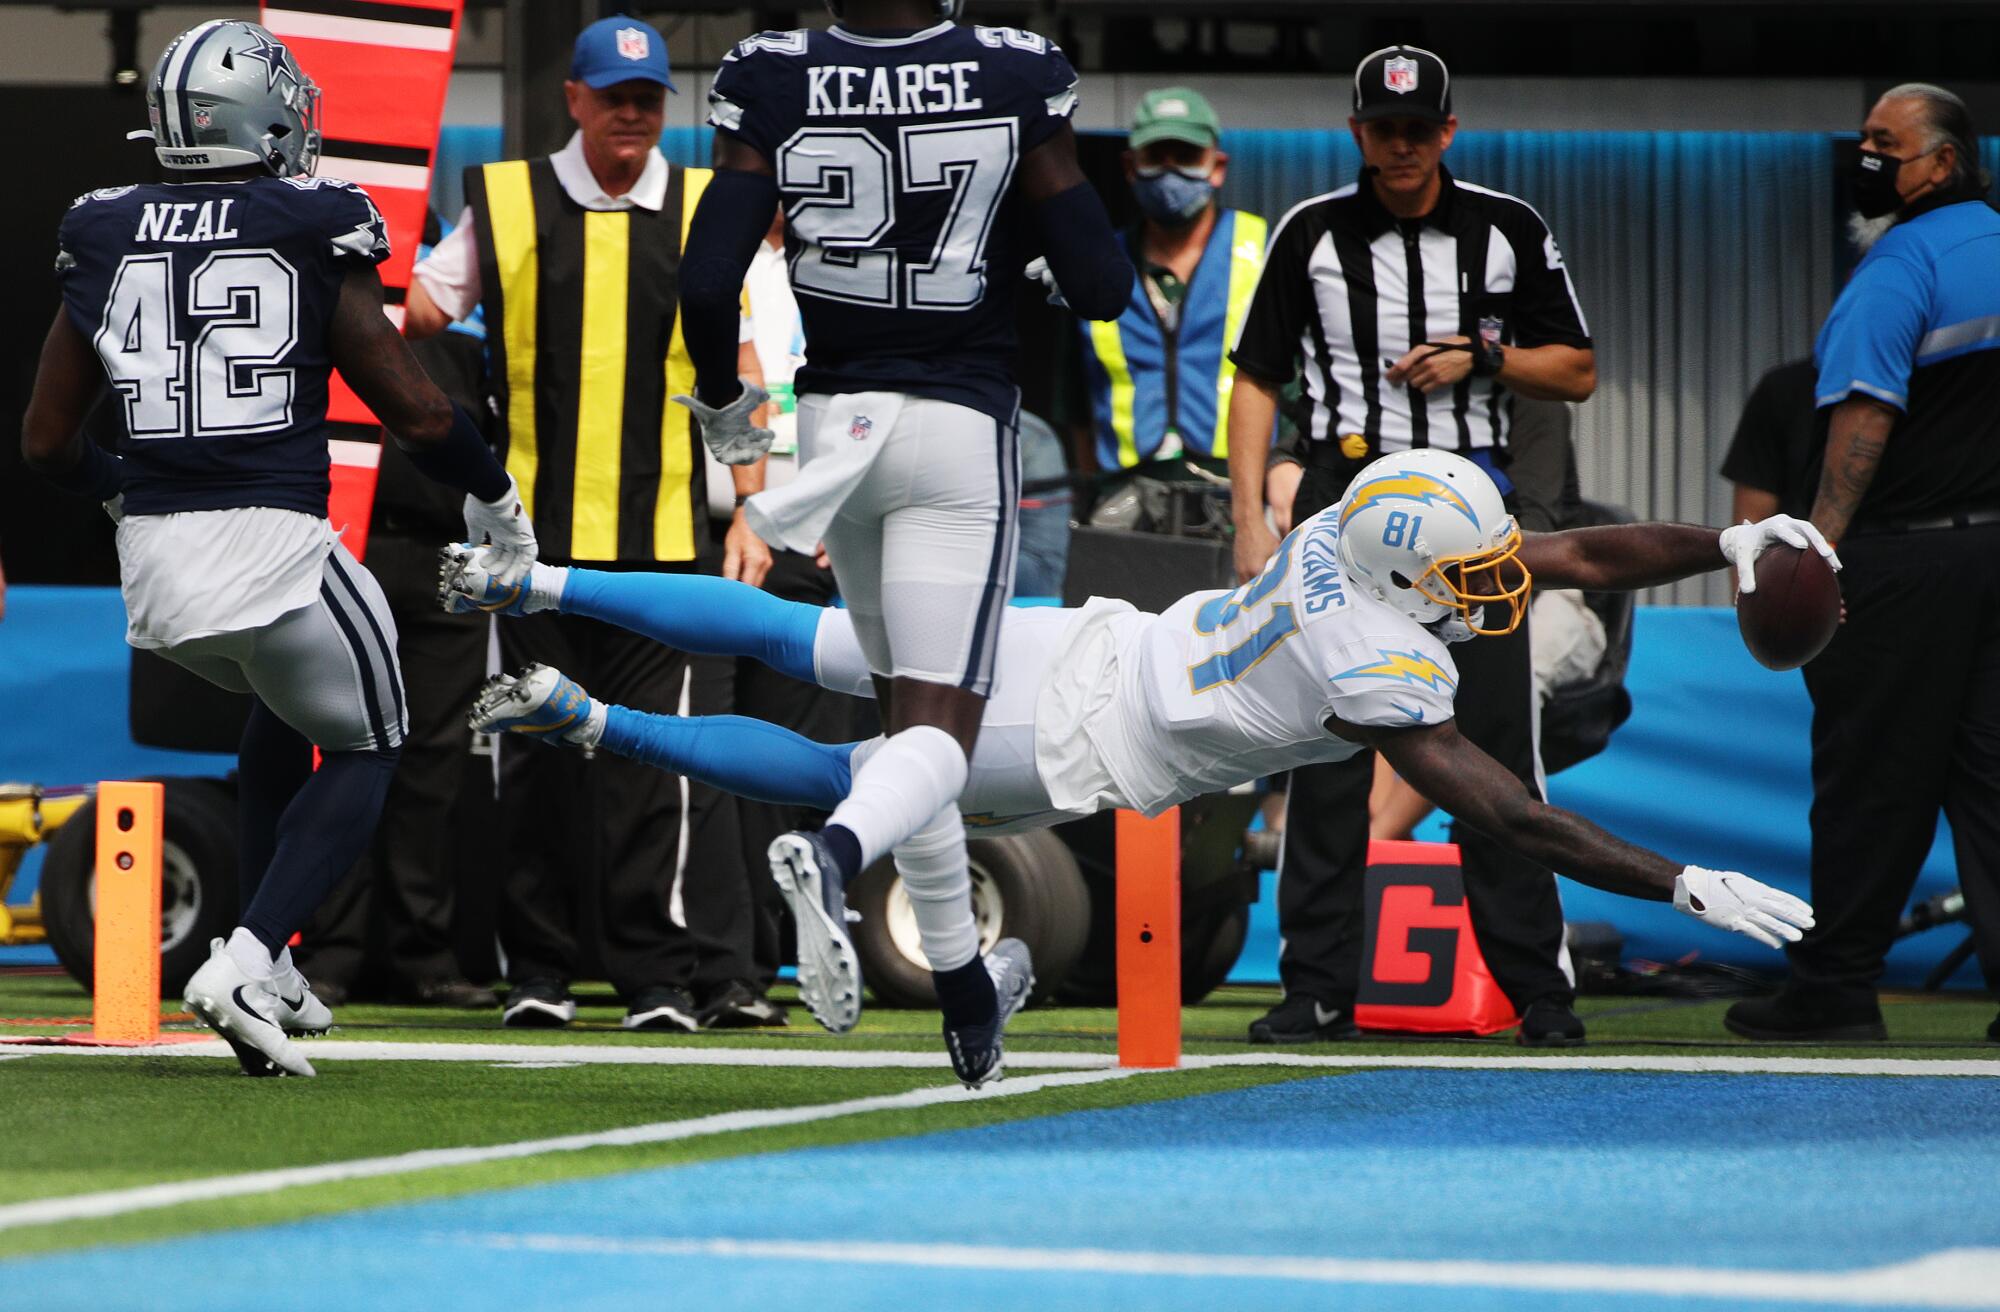 Chargers wide receiver Mike Williams dives into the end zone to score on a 12-yard touchdown pass from Justin Herbert.